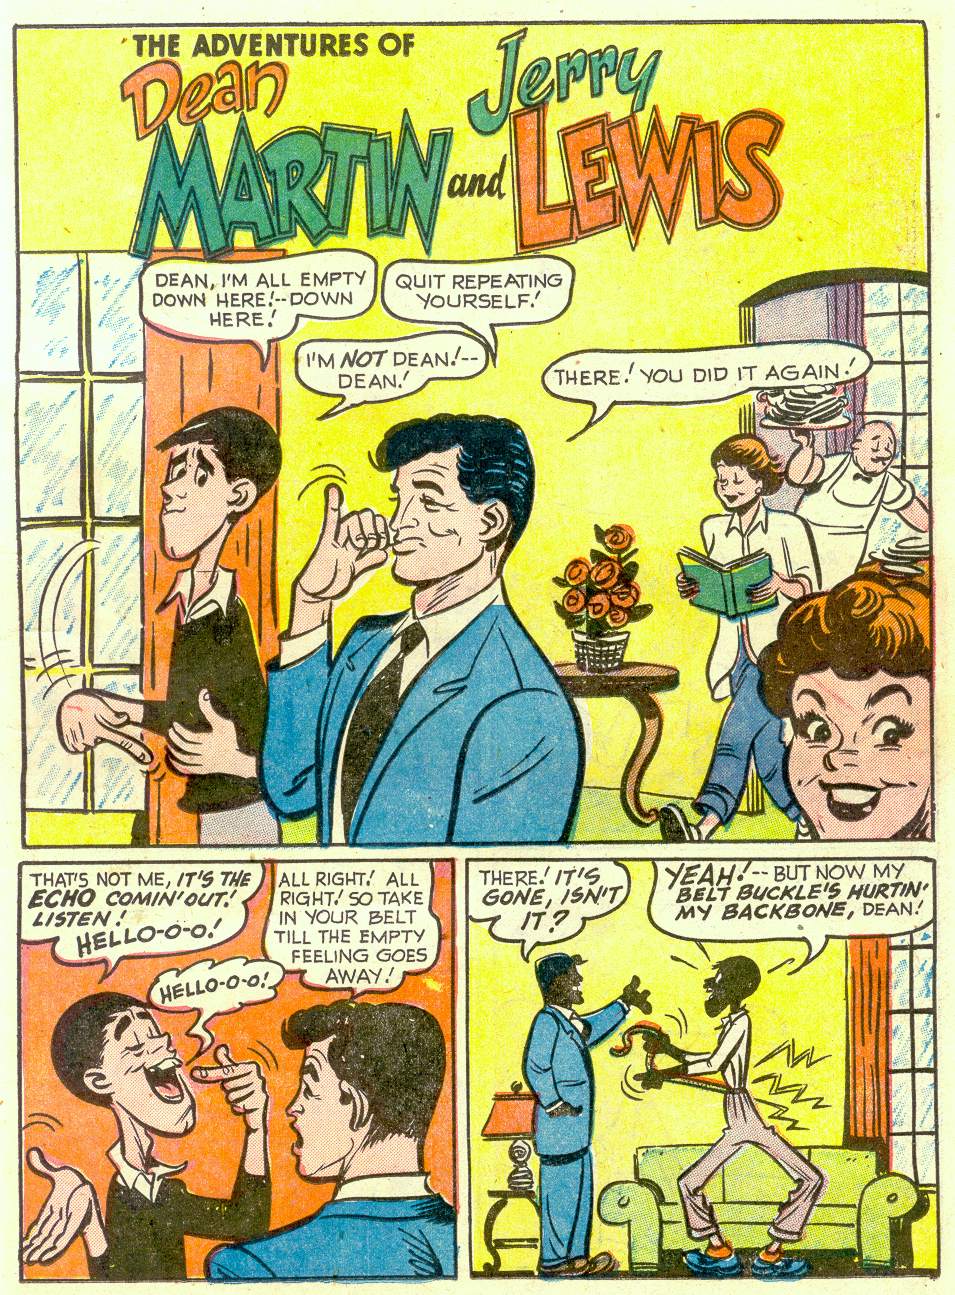 Read online The Adventures of Dean Martin and Jerry Lewis comic -  Issue #1 - 15